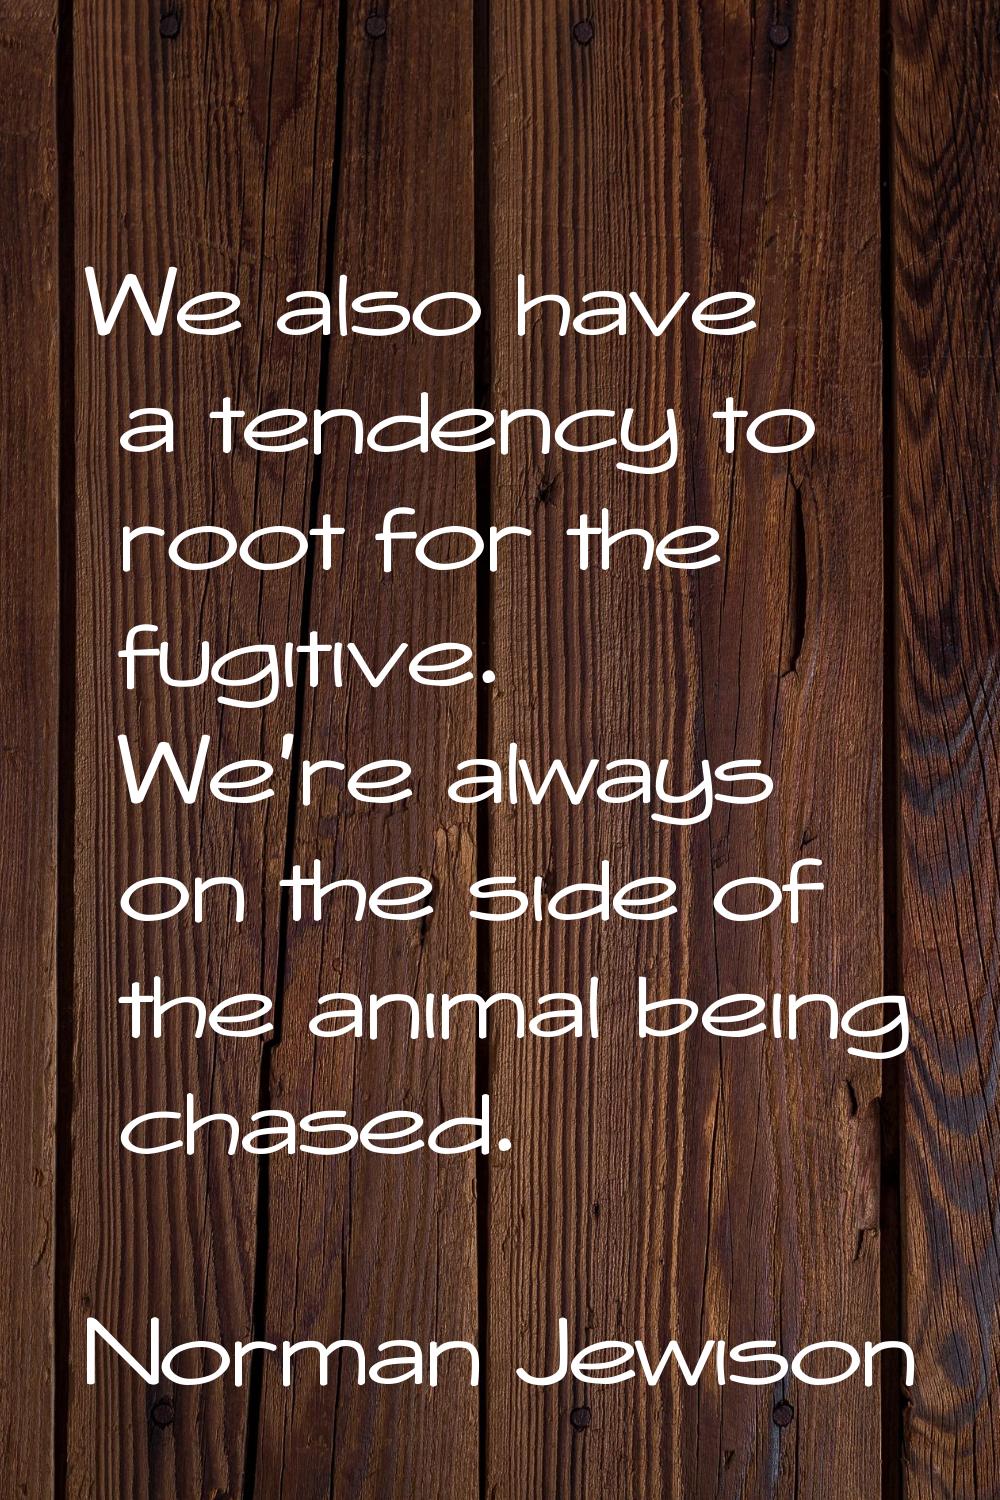 We also have a tendency to root for the fugitive. We're always on the side of the animal being chas